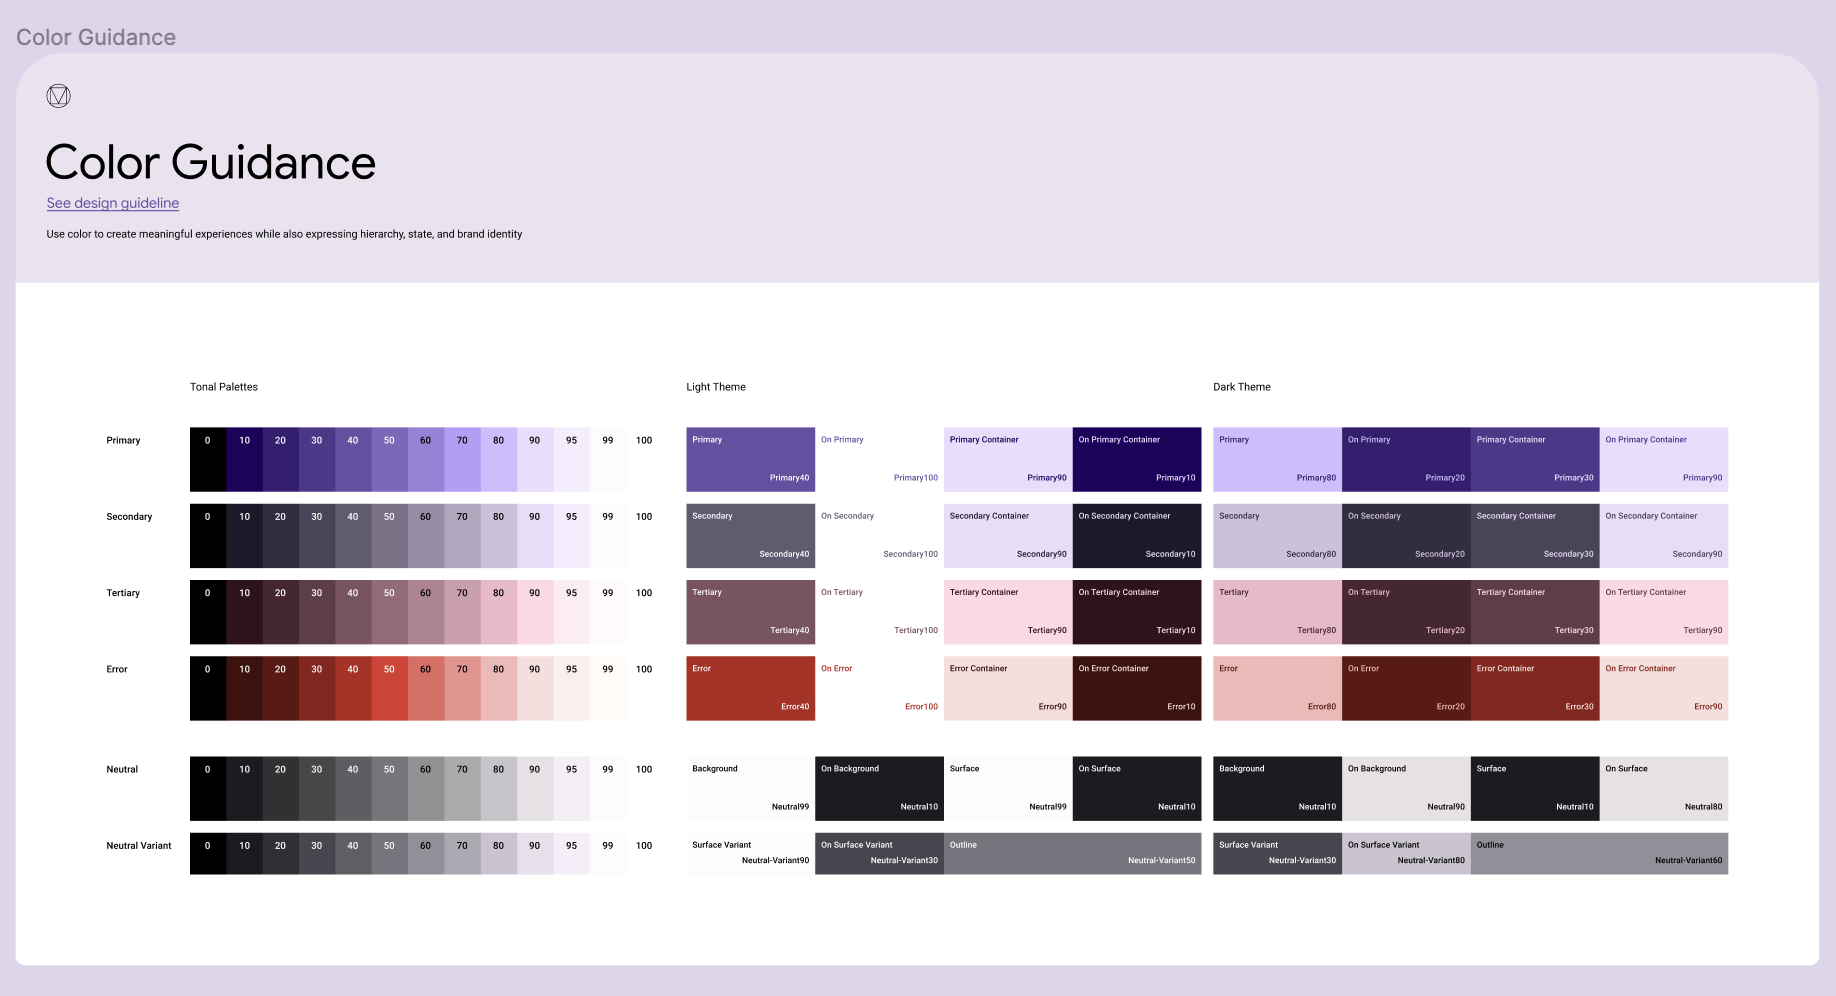 The color guidance frame in the Material 3 Design Kit Figma file